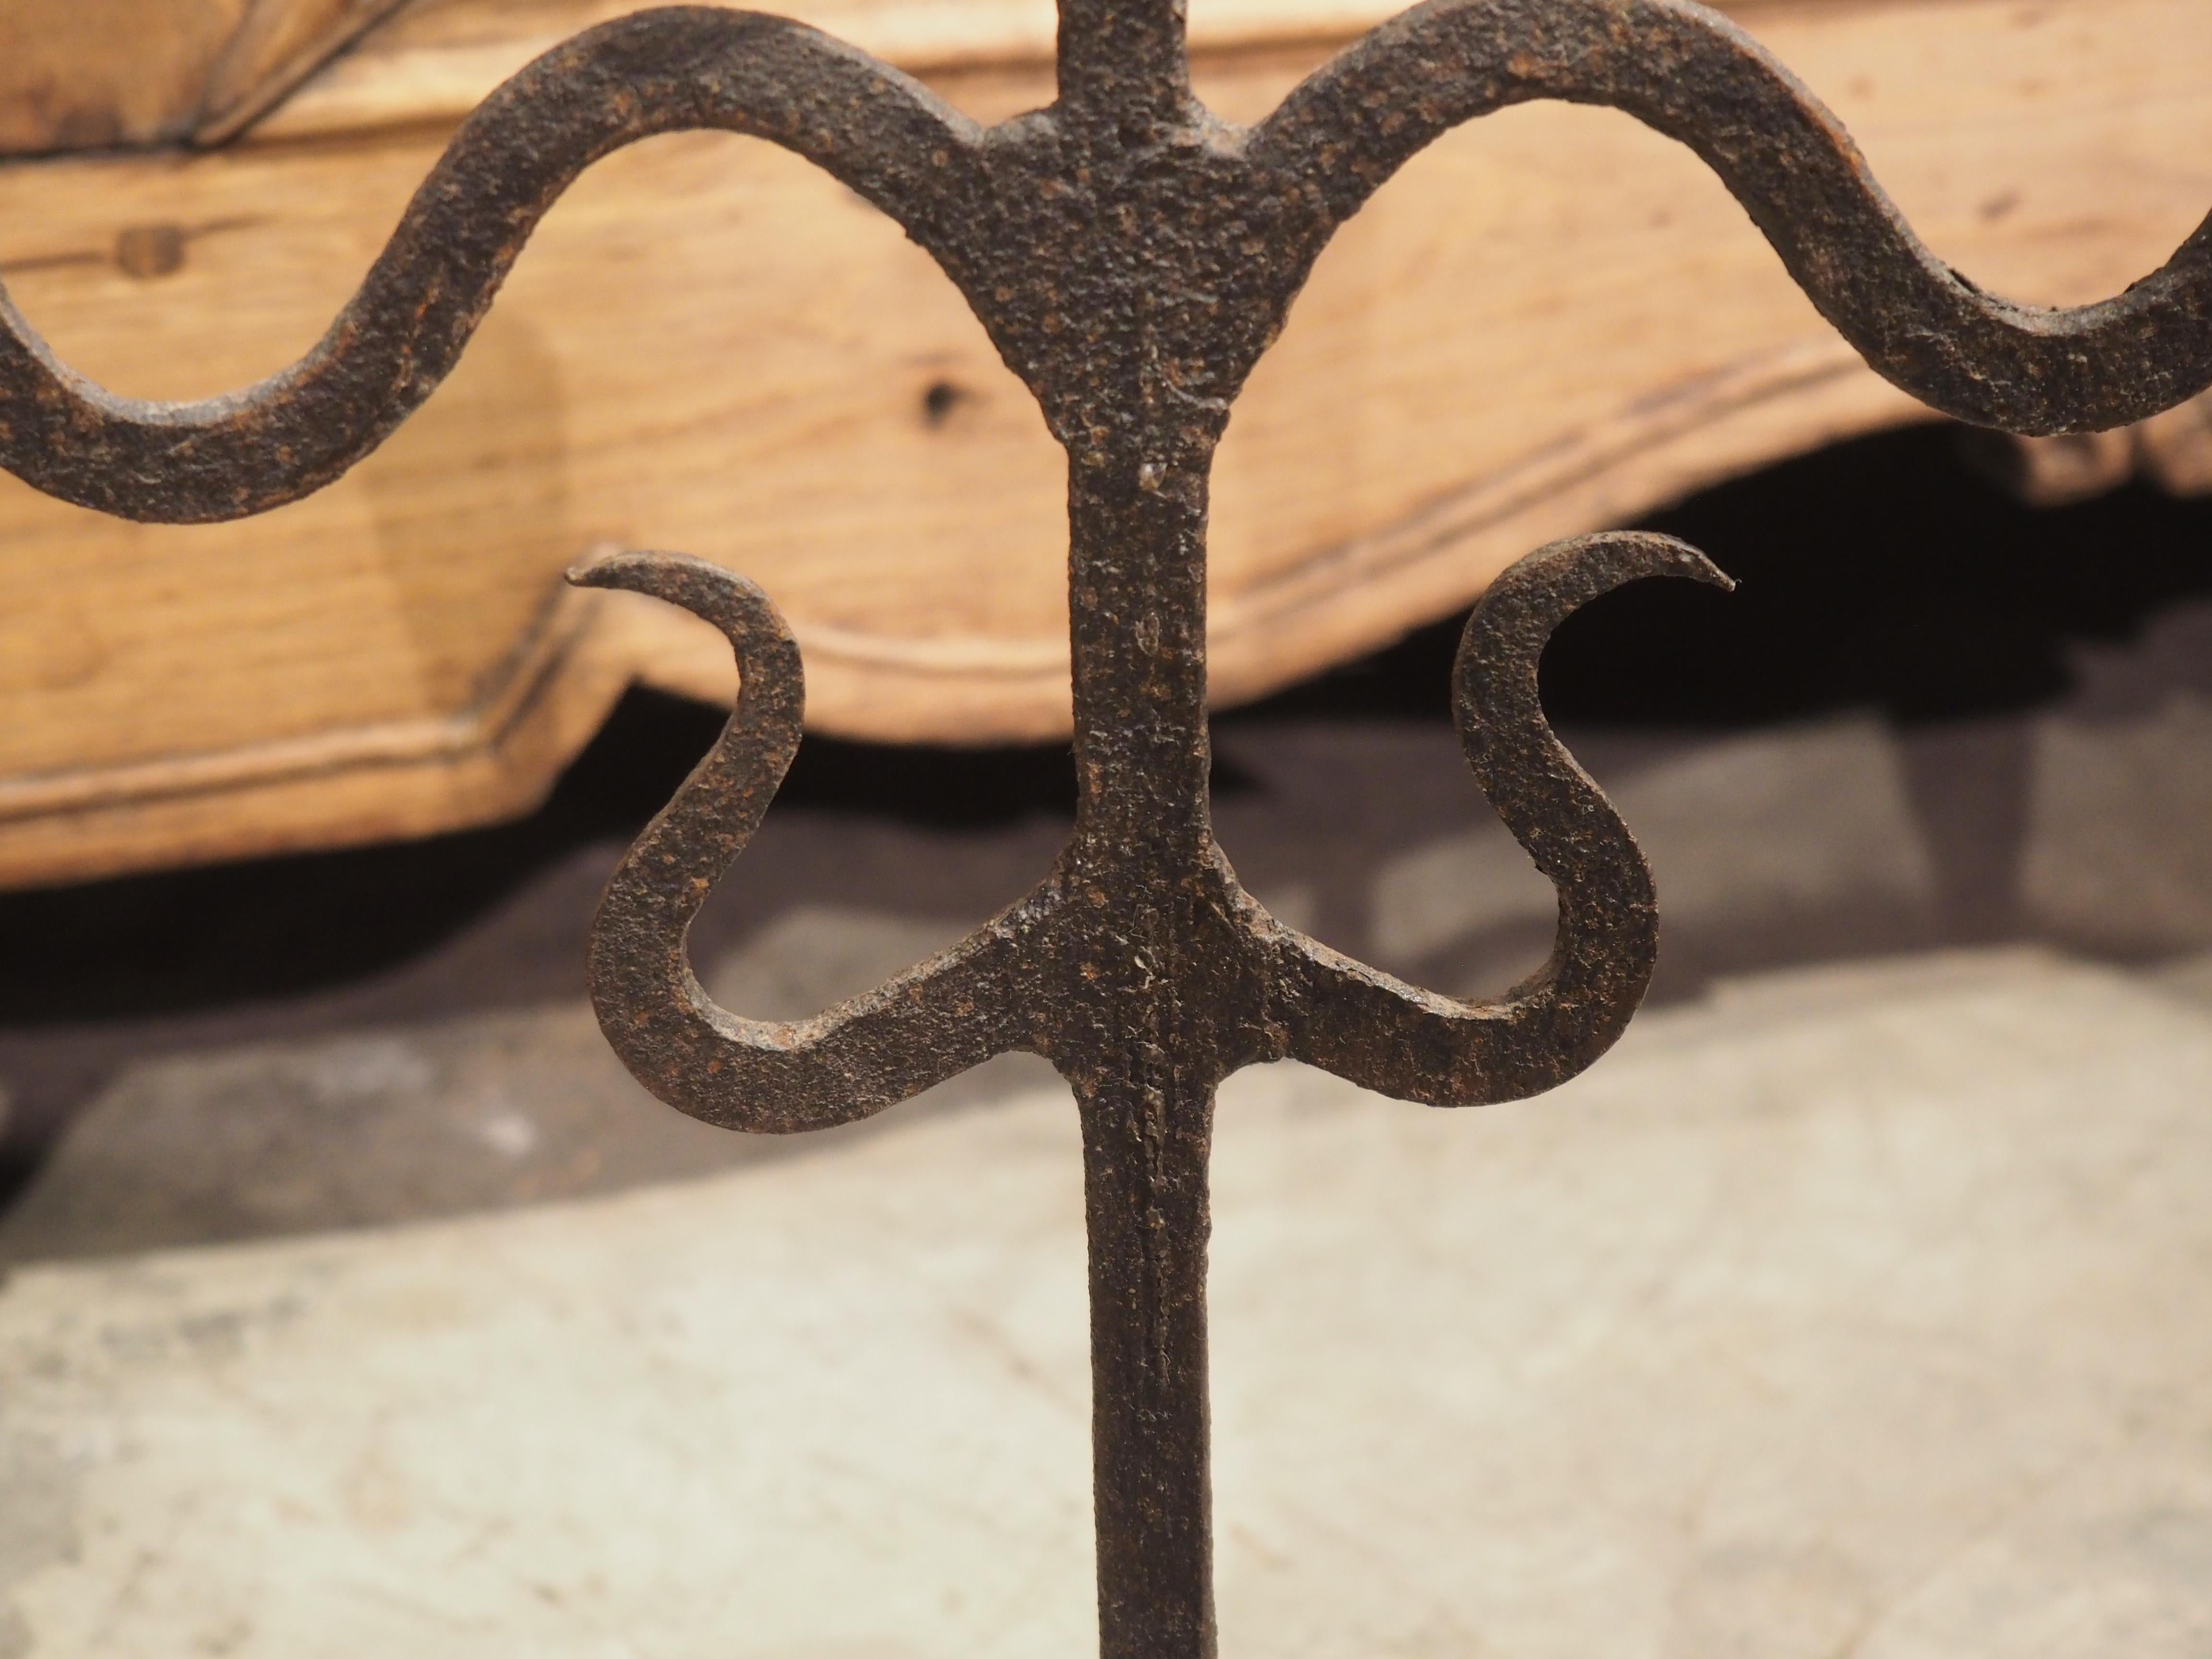 Spanish Pair of Hand Forged Iron Candle Holders from Spain, circa 1800